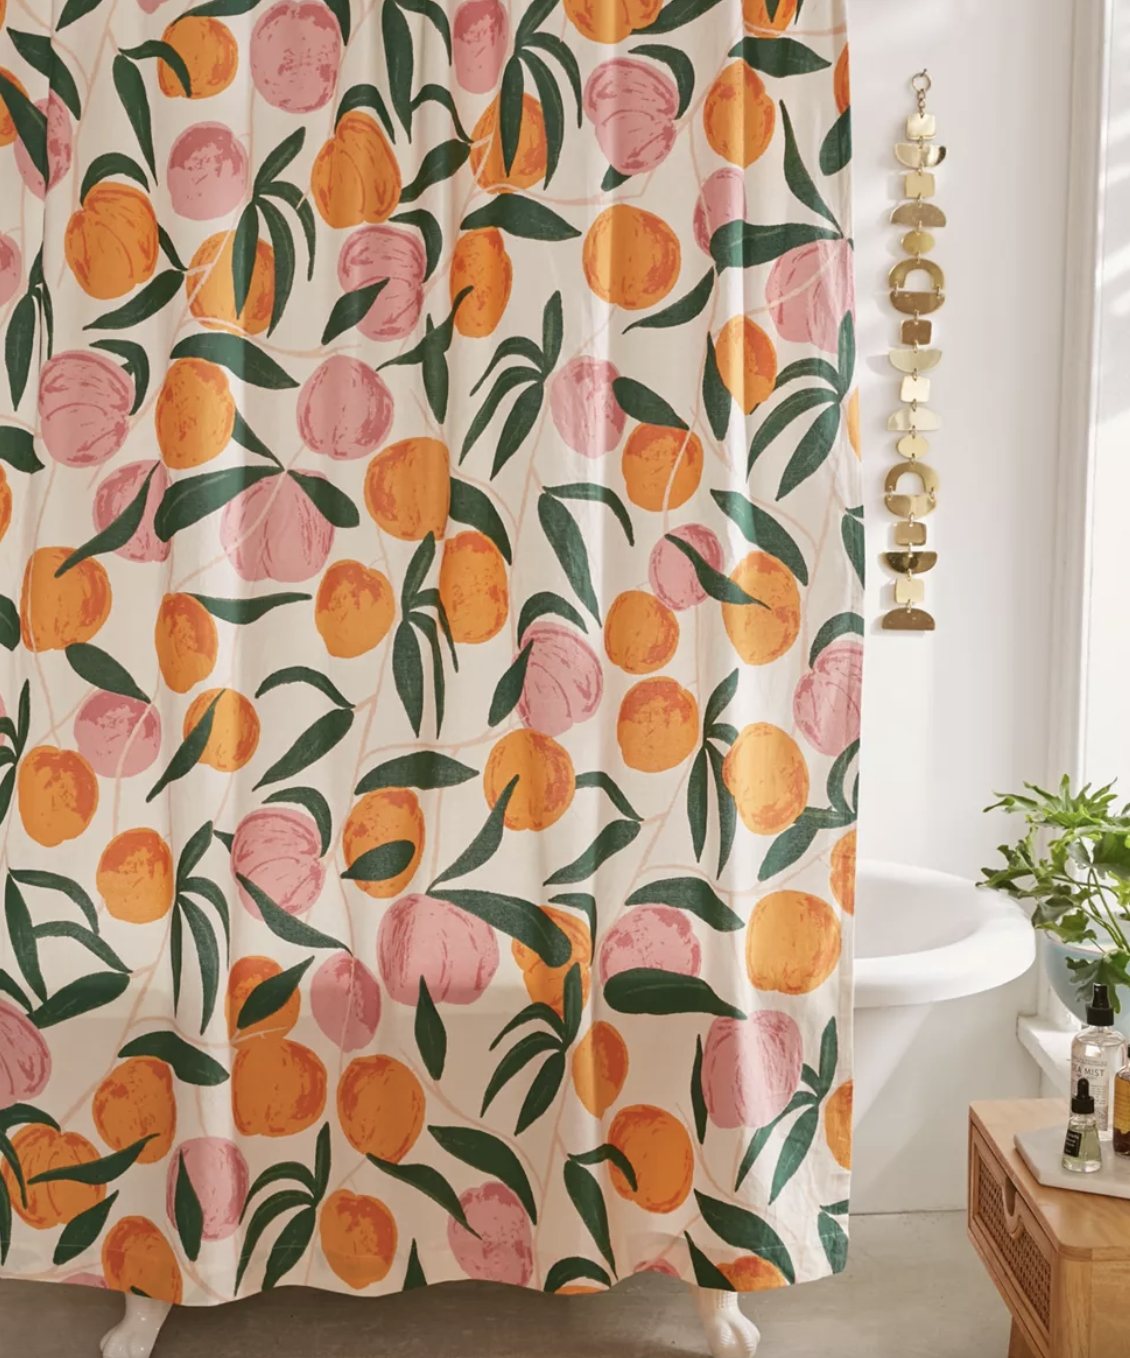 the Allover Fruits Shower Curtain